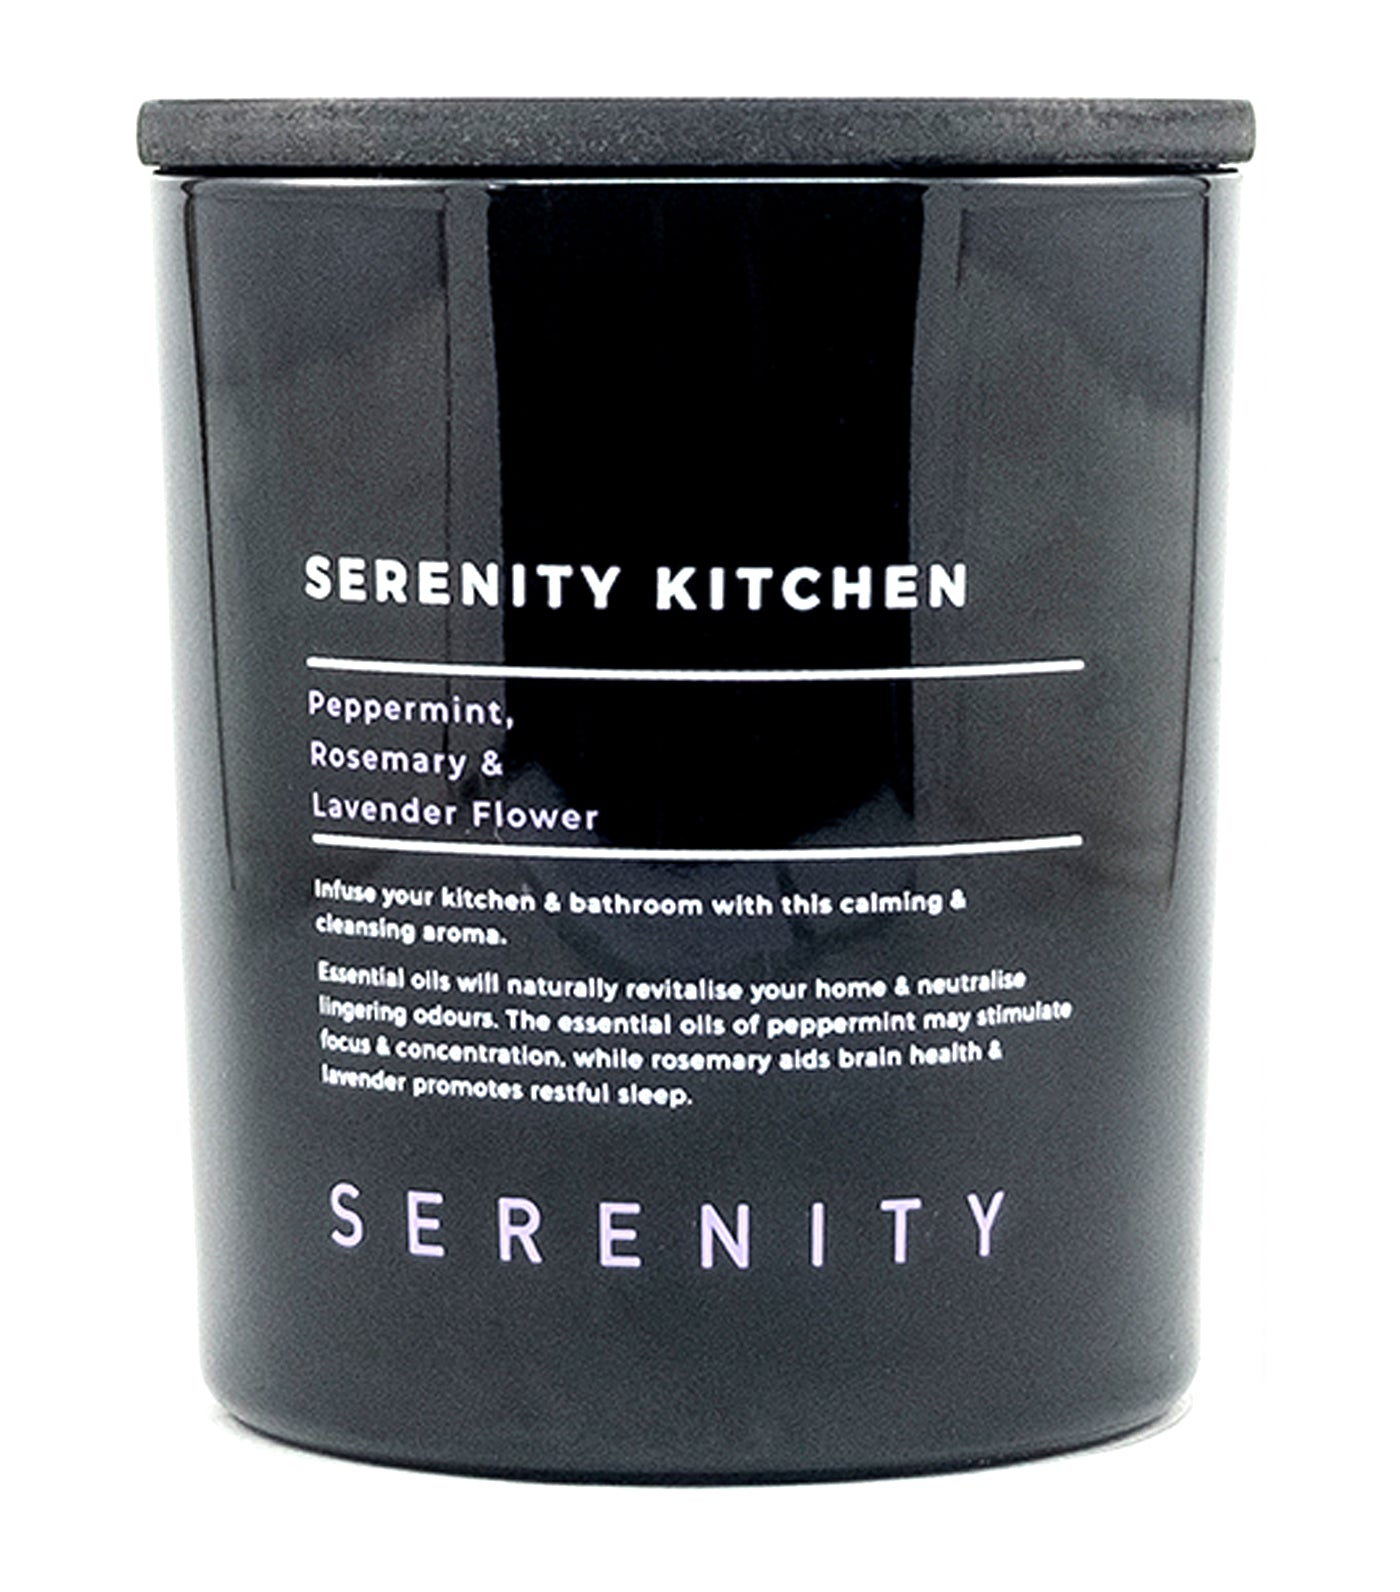 serenity peppermint, rosemary, and lavender flower scented candle